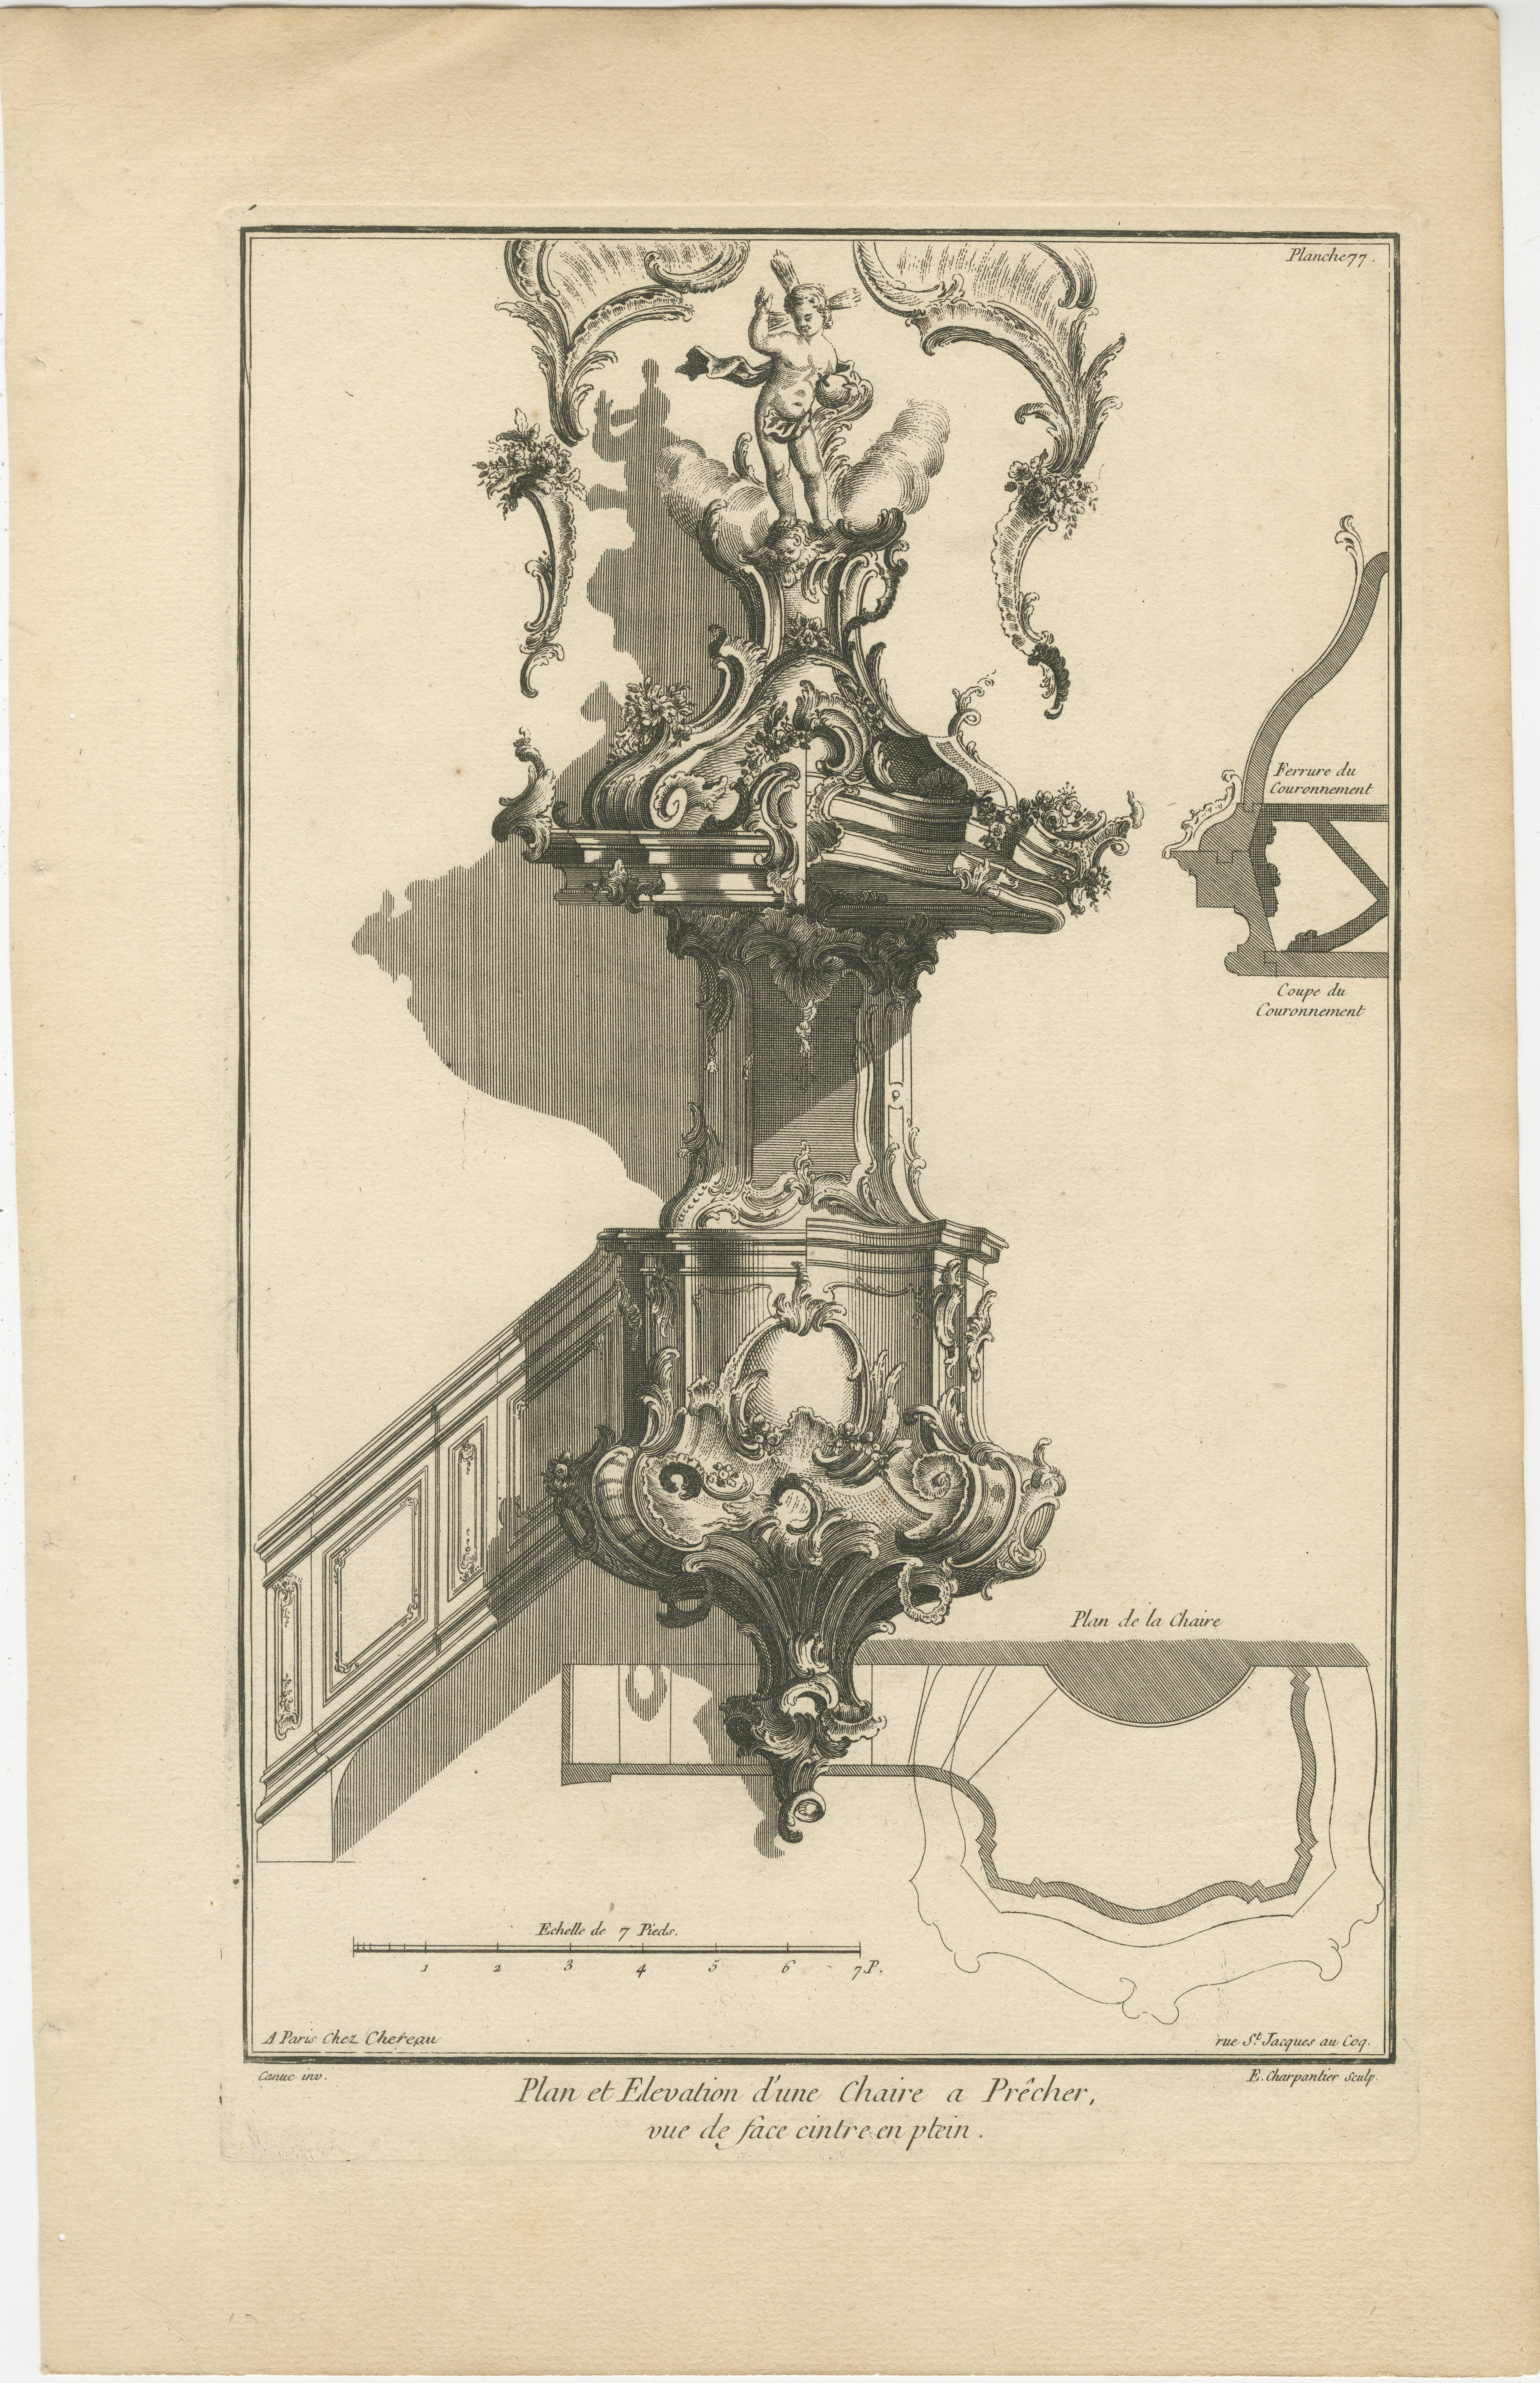 This is an original antique architectural design for a pulpit in baroque style dating approximately between 1740 and 1760. 

The artist responsible for this design is Franz Xaver Habermann, and it was published by Johann Georg Hertel I in Augsburg.